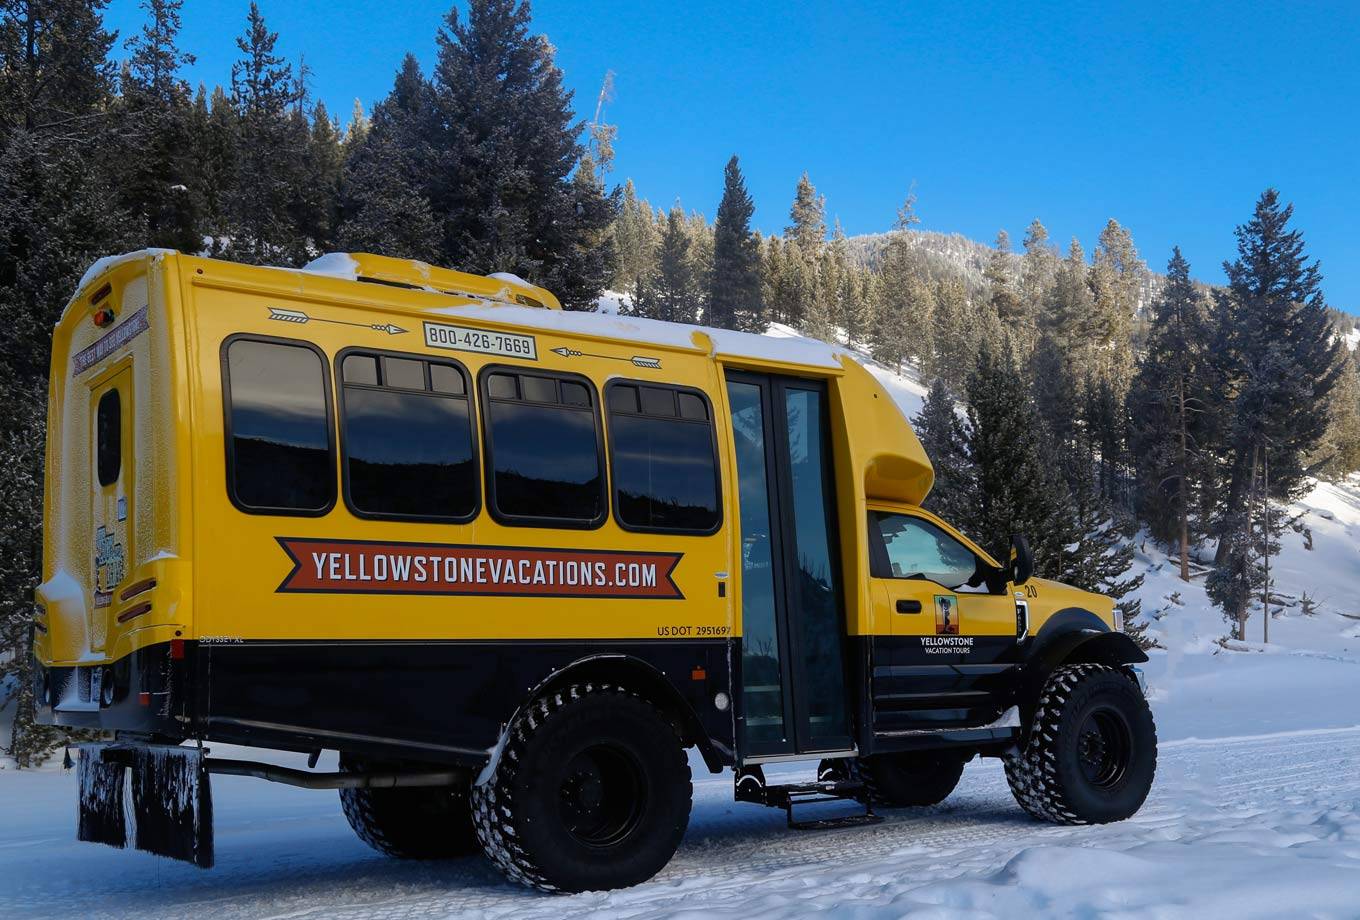 A Yellowstone Vacations snowcoach in Yellowstone National Park